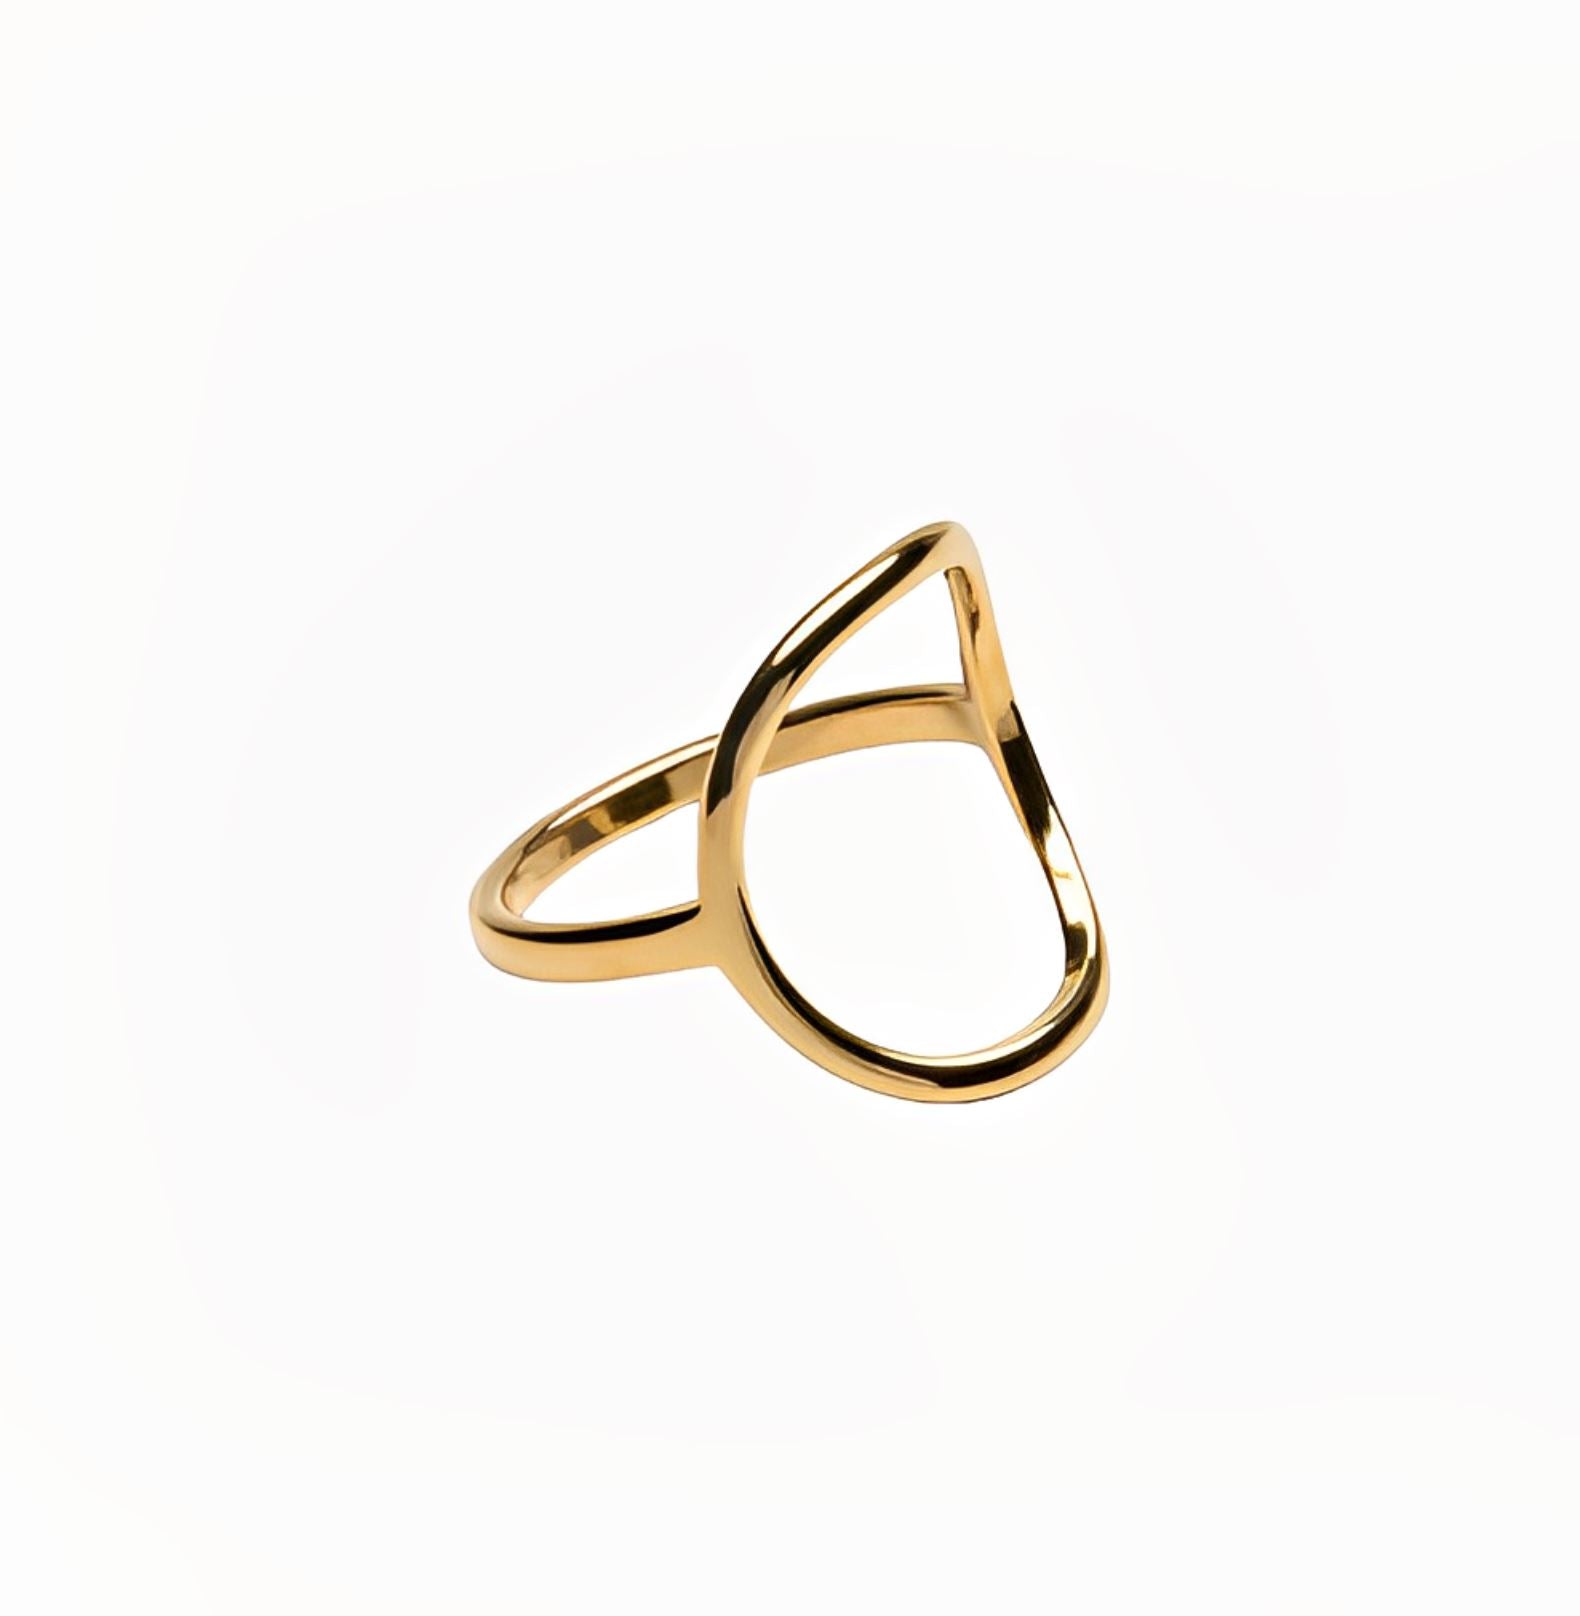 OVAL RING braclet Yubama Jewelry Online Store - The Elegant Designs of Gold and Silver ! 